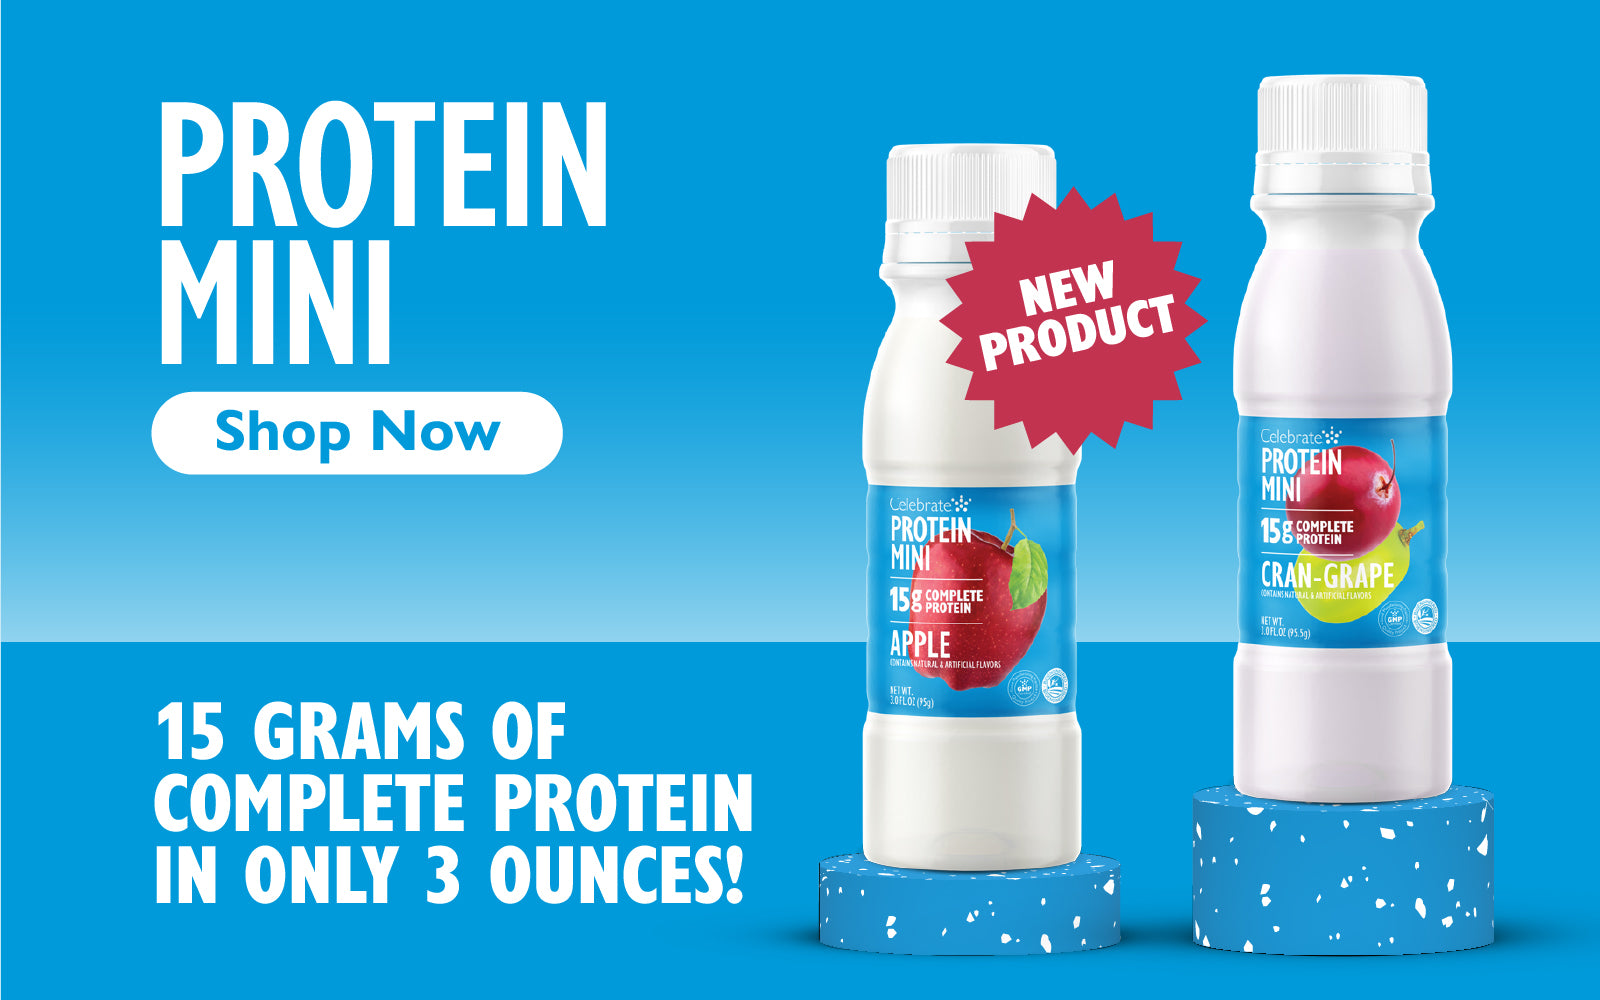 Banner image showing new Protein Mini bottles with 15 grams of complete protein